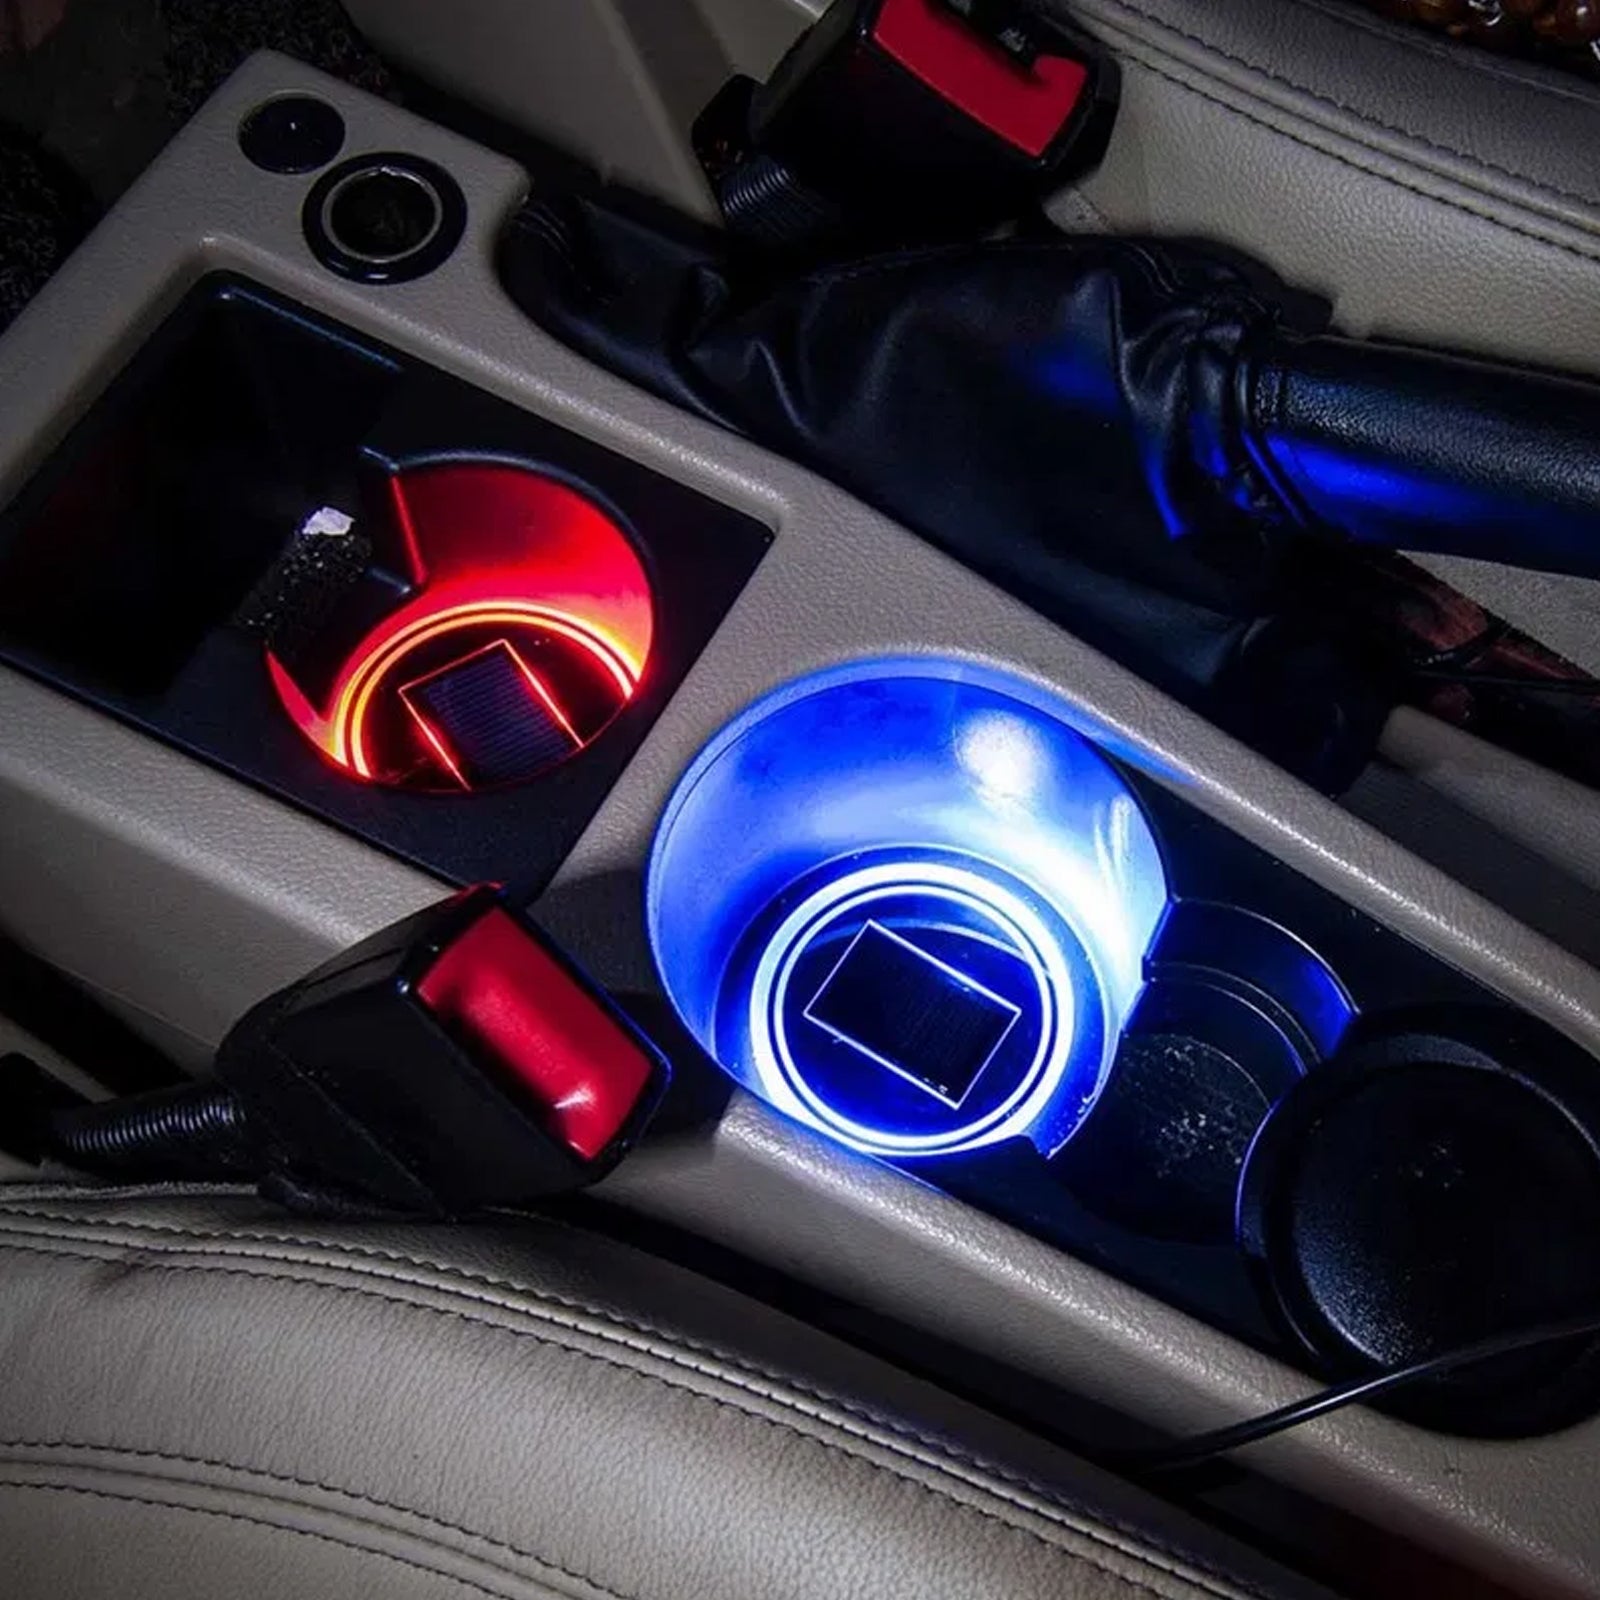 LED Car Coaster Cup Holder Lights Luminescent Pad With USB